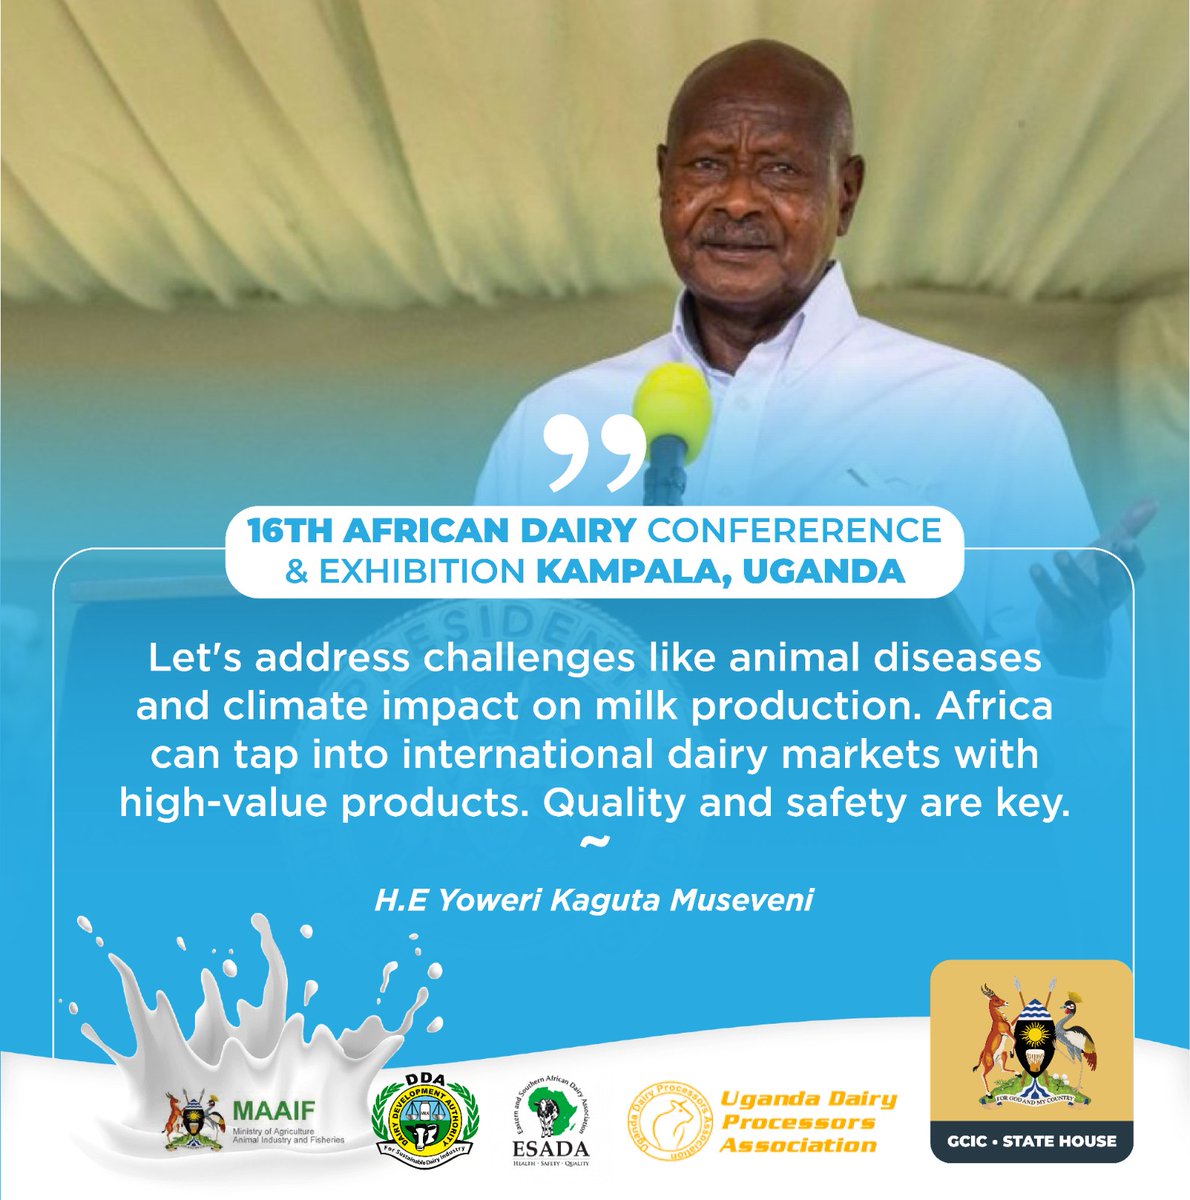 President Museveni also emphasised addressing challenges like animal diseases and climate impact on milk production. He added that Africa can tap into international dairy markets with high-value products because Quality and safety are key.#AFDA2023